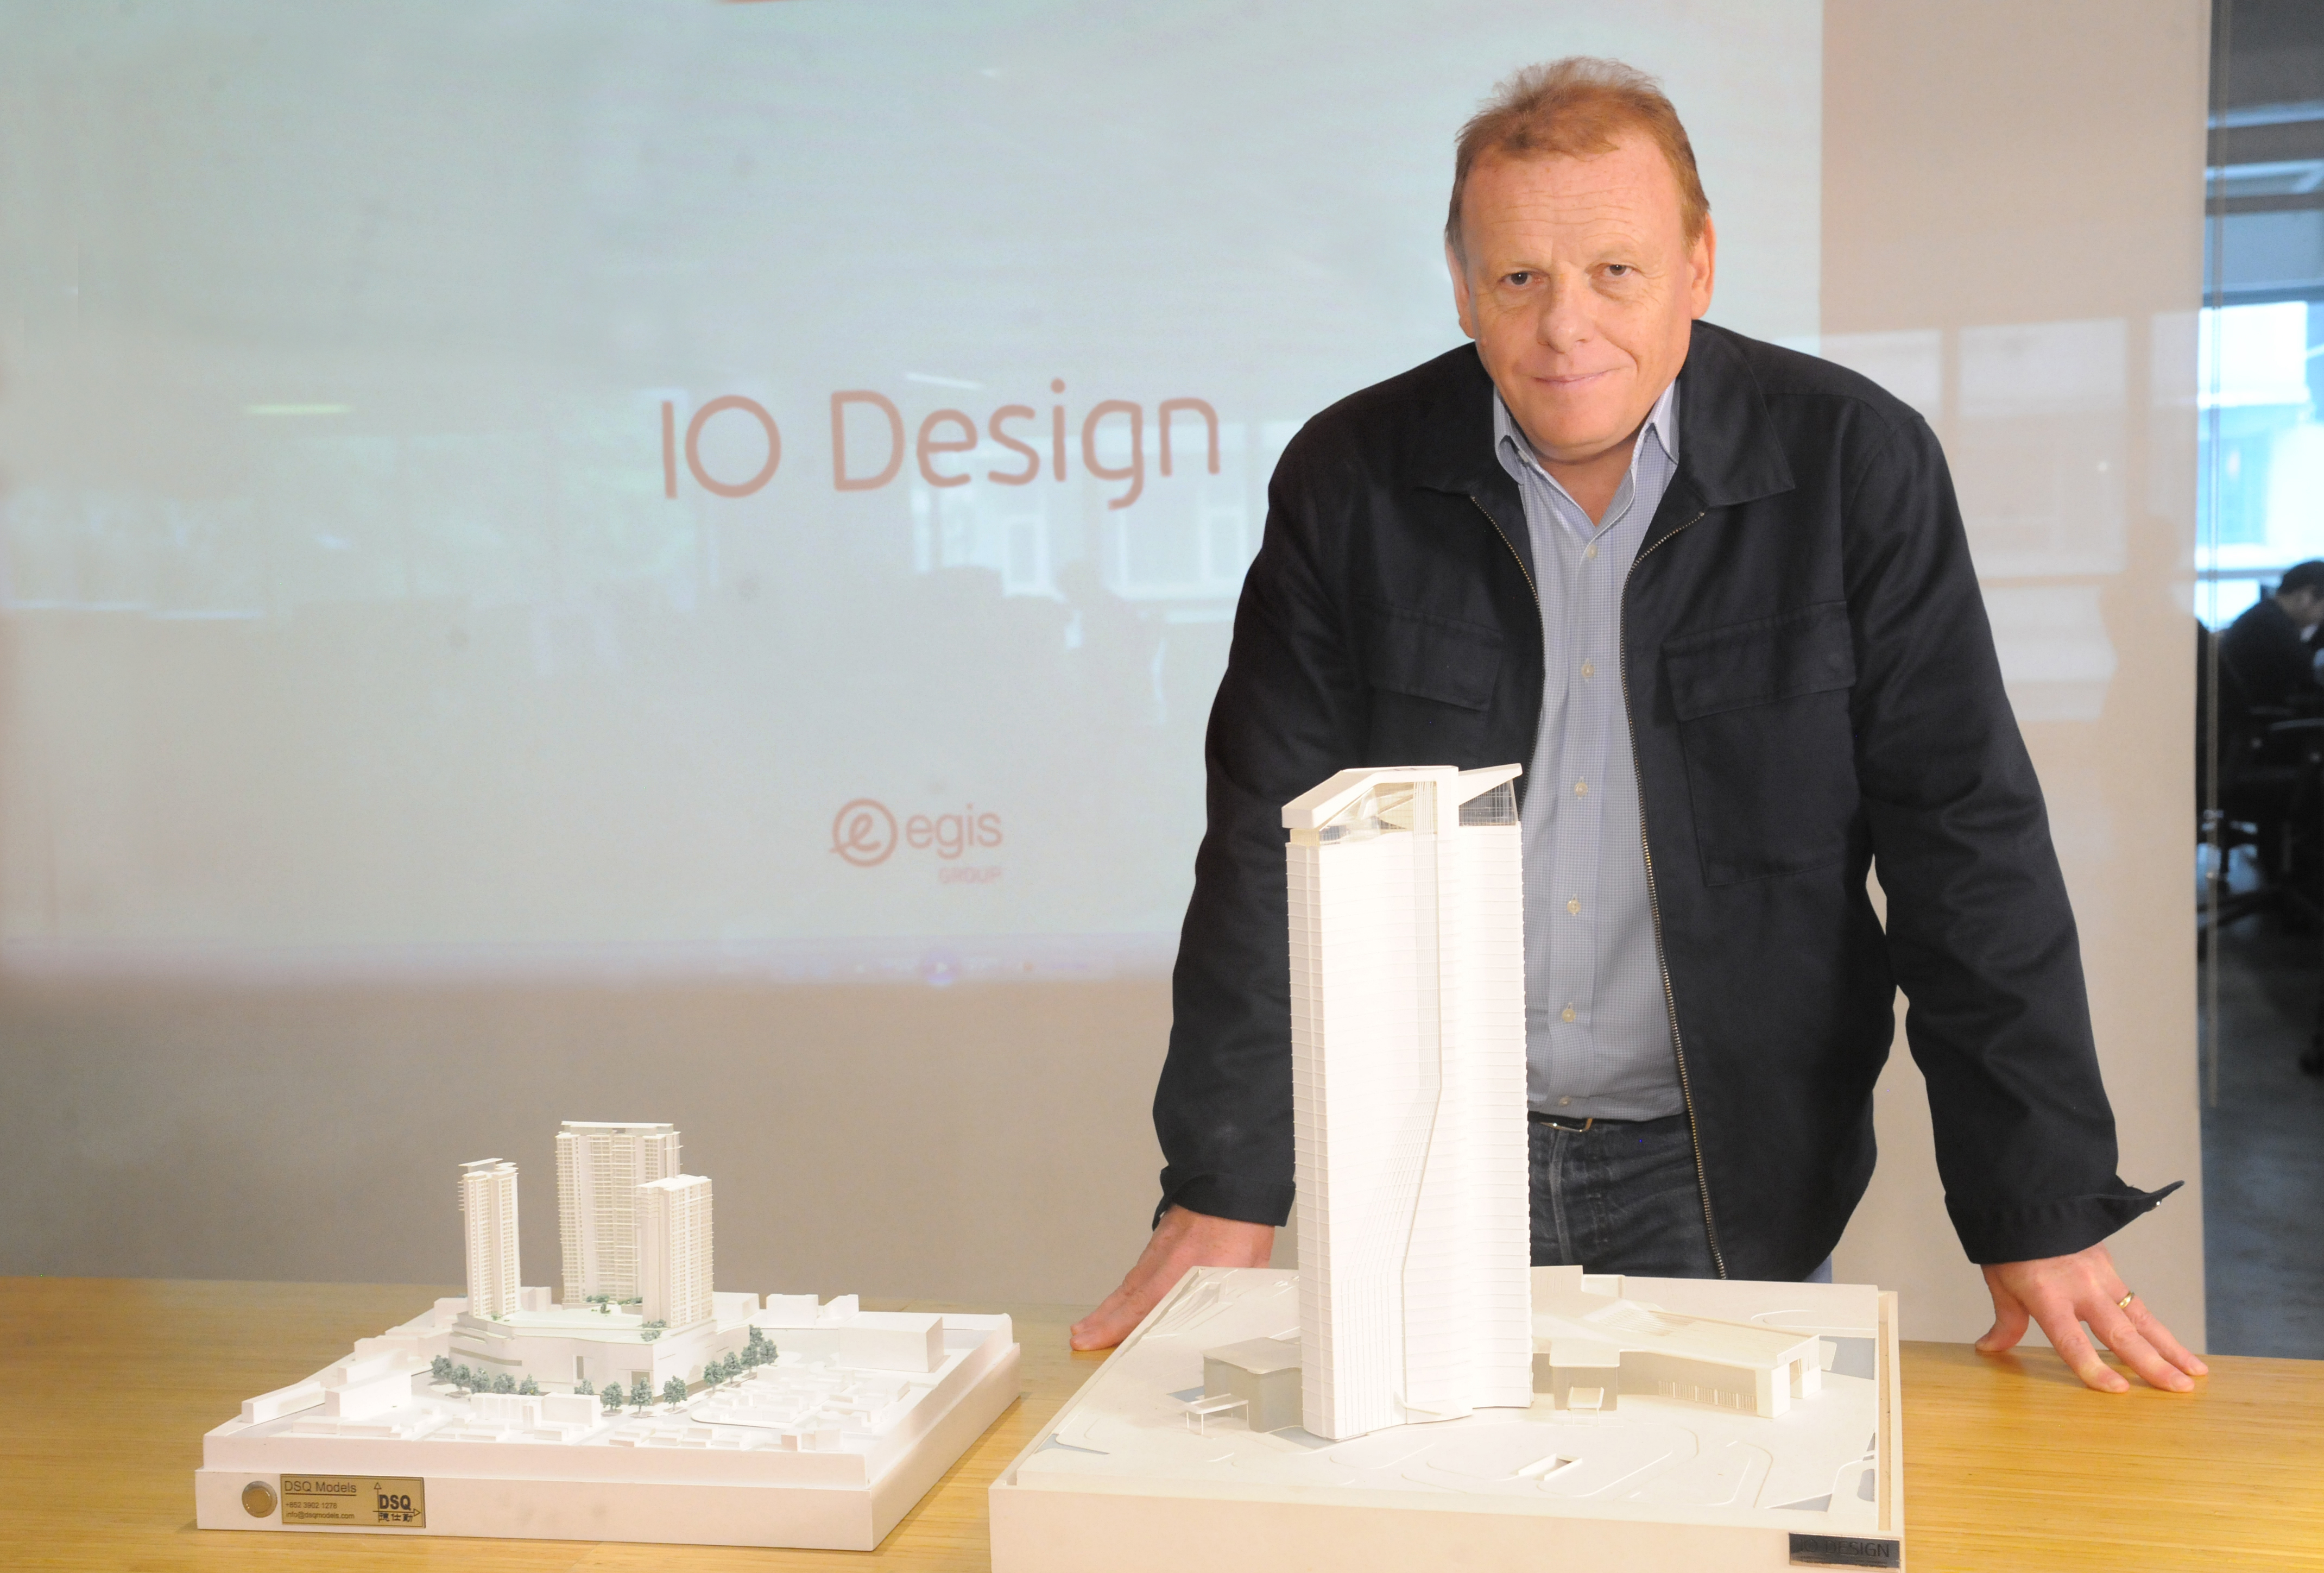 10 Design: Shaping the Greater Bay Area Skyline